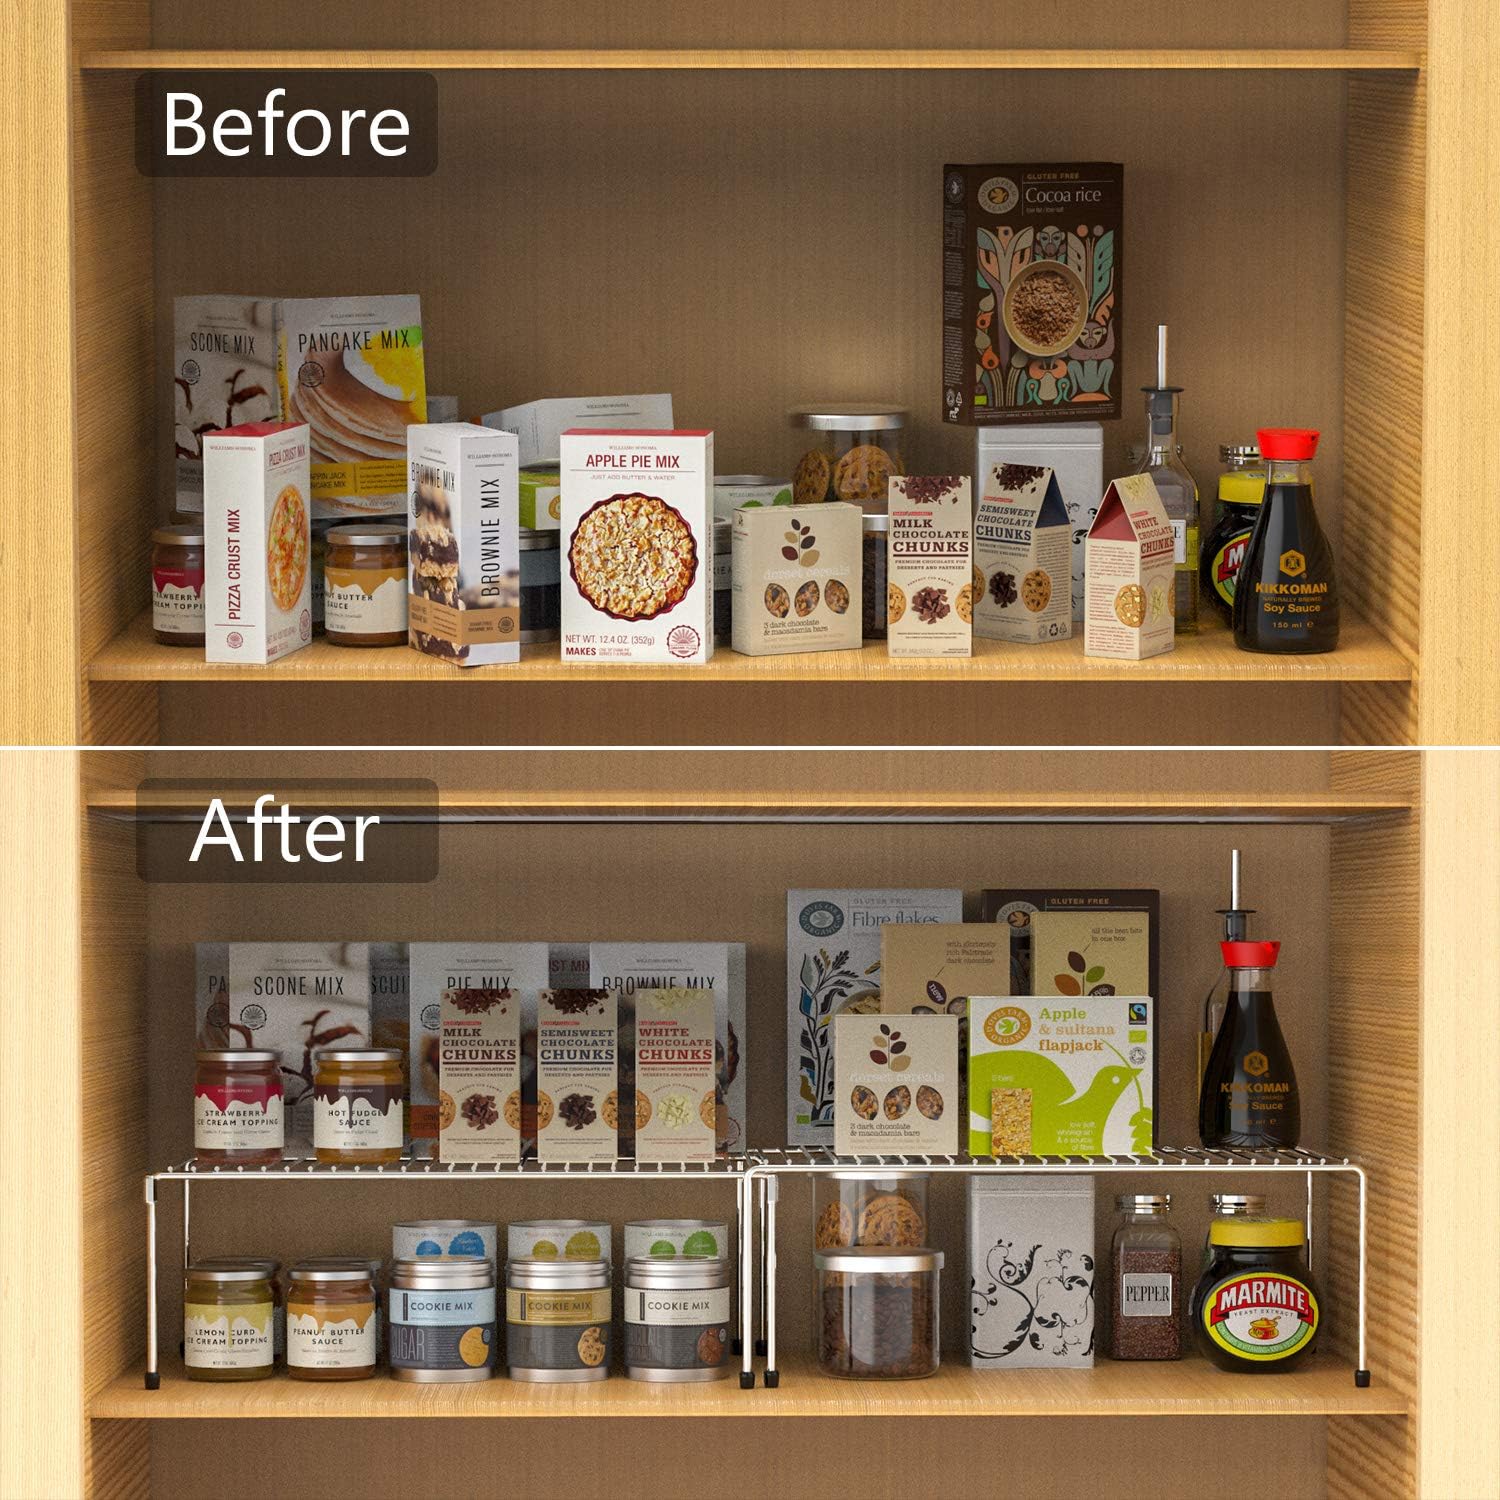 WOSOVO Kitchen Cabinet Organizer before and after